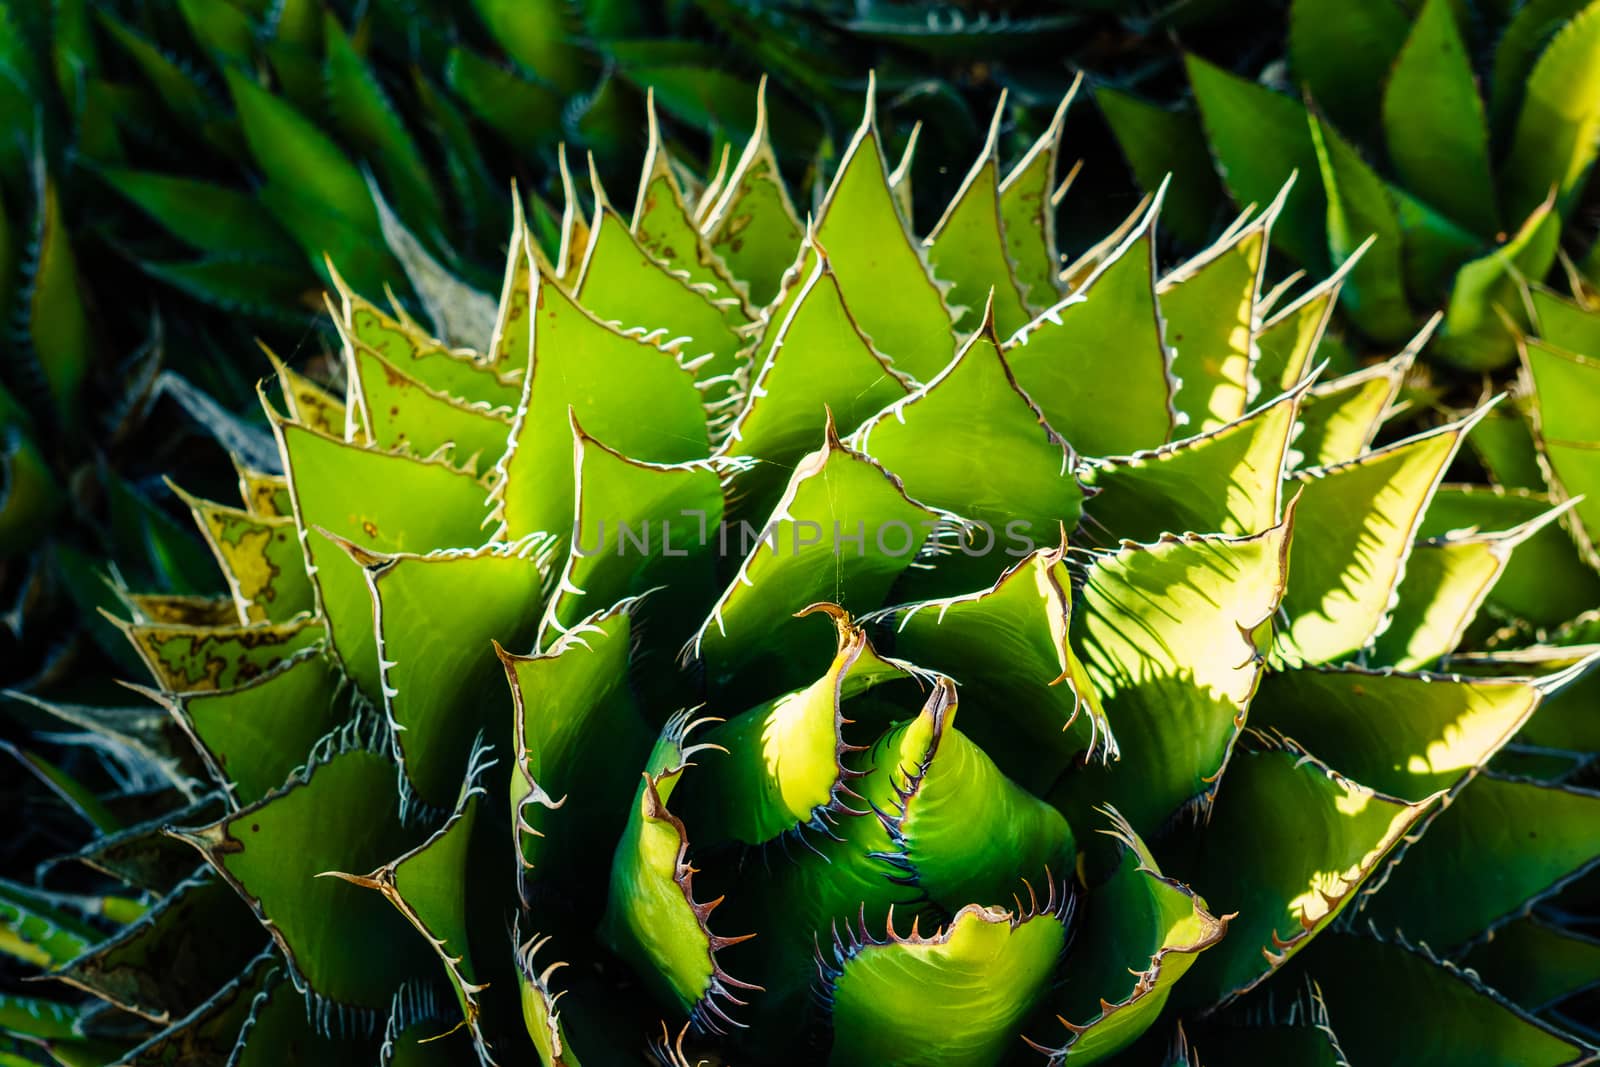 Desert Aloe Vera Plant with Dramatic Spines by thirdlensphoto